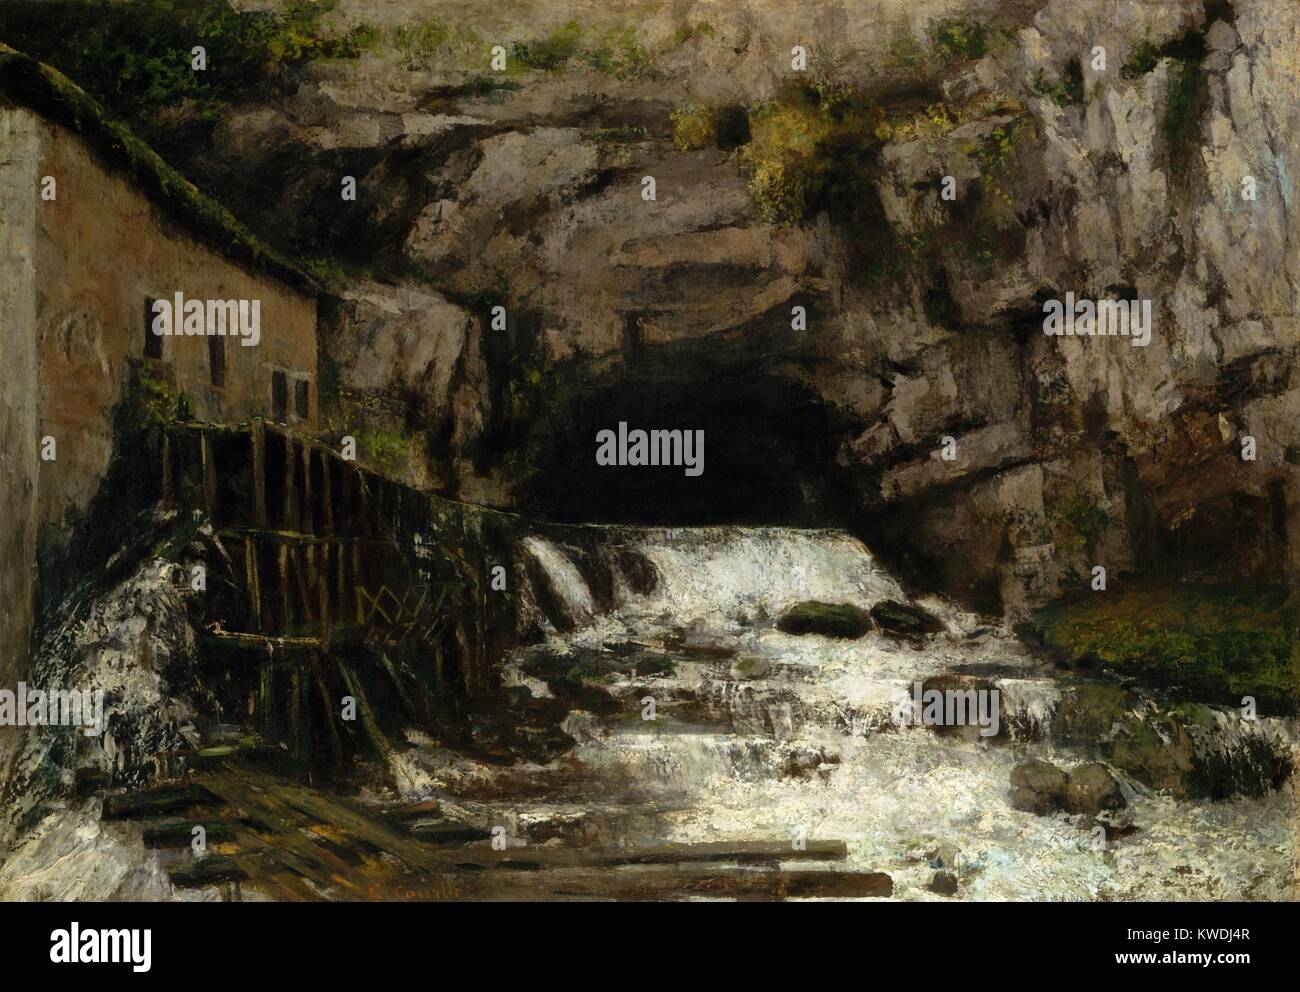 THE SOURCES OF THE LOUE, by Gustave Courbet, 1864, French painting, oil on canvas. The rocky cave at the source of the River Loue was a geological curiosity in Courbets native village, Ornans. The mill at left, the rocks, and water are painted with palette knife and brush (BSLOC 2017 9 120) Stock Photo